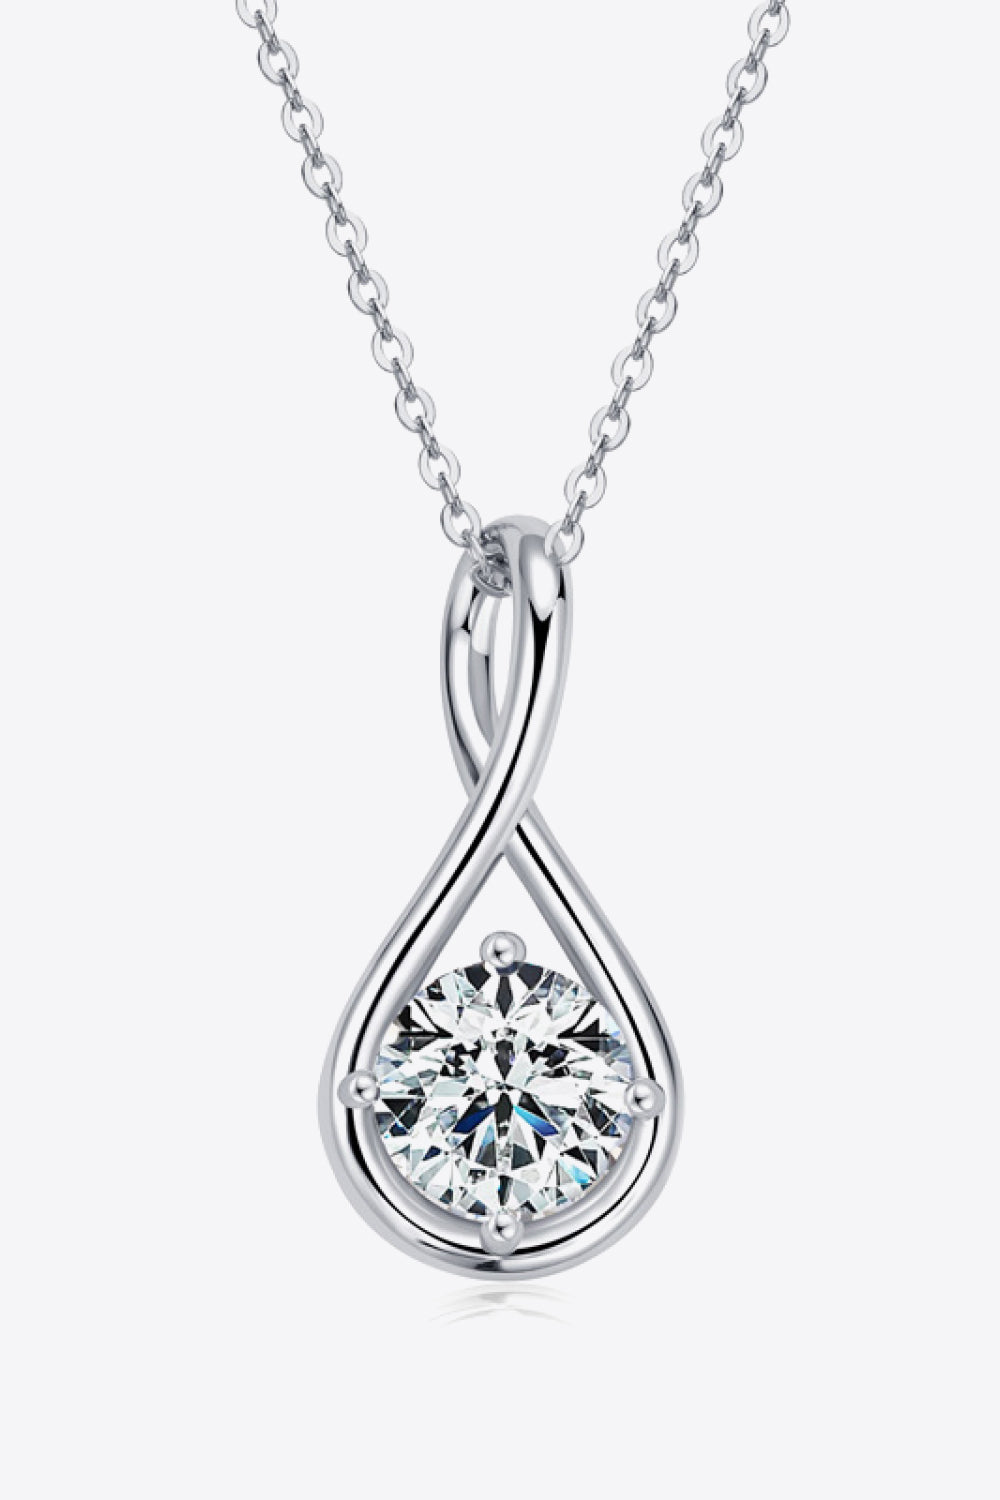 2 Carat Moissanite 925 Sterling Silver Necklace